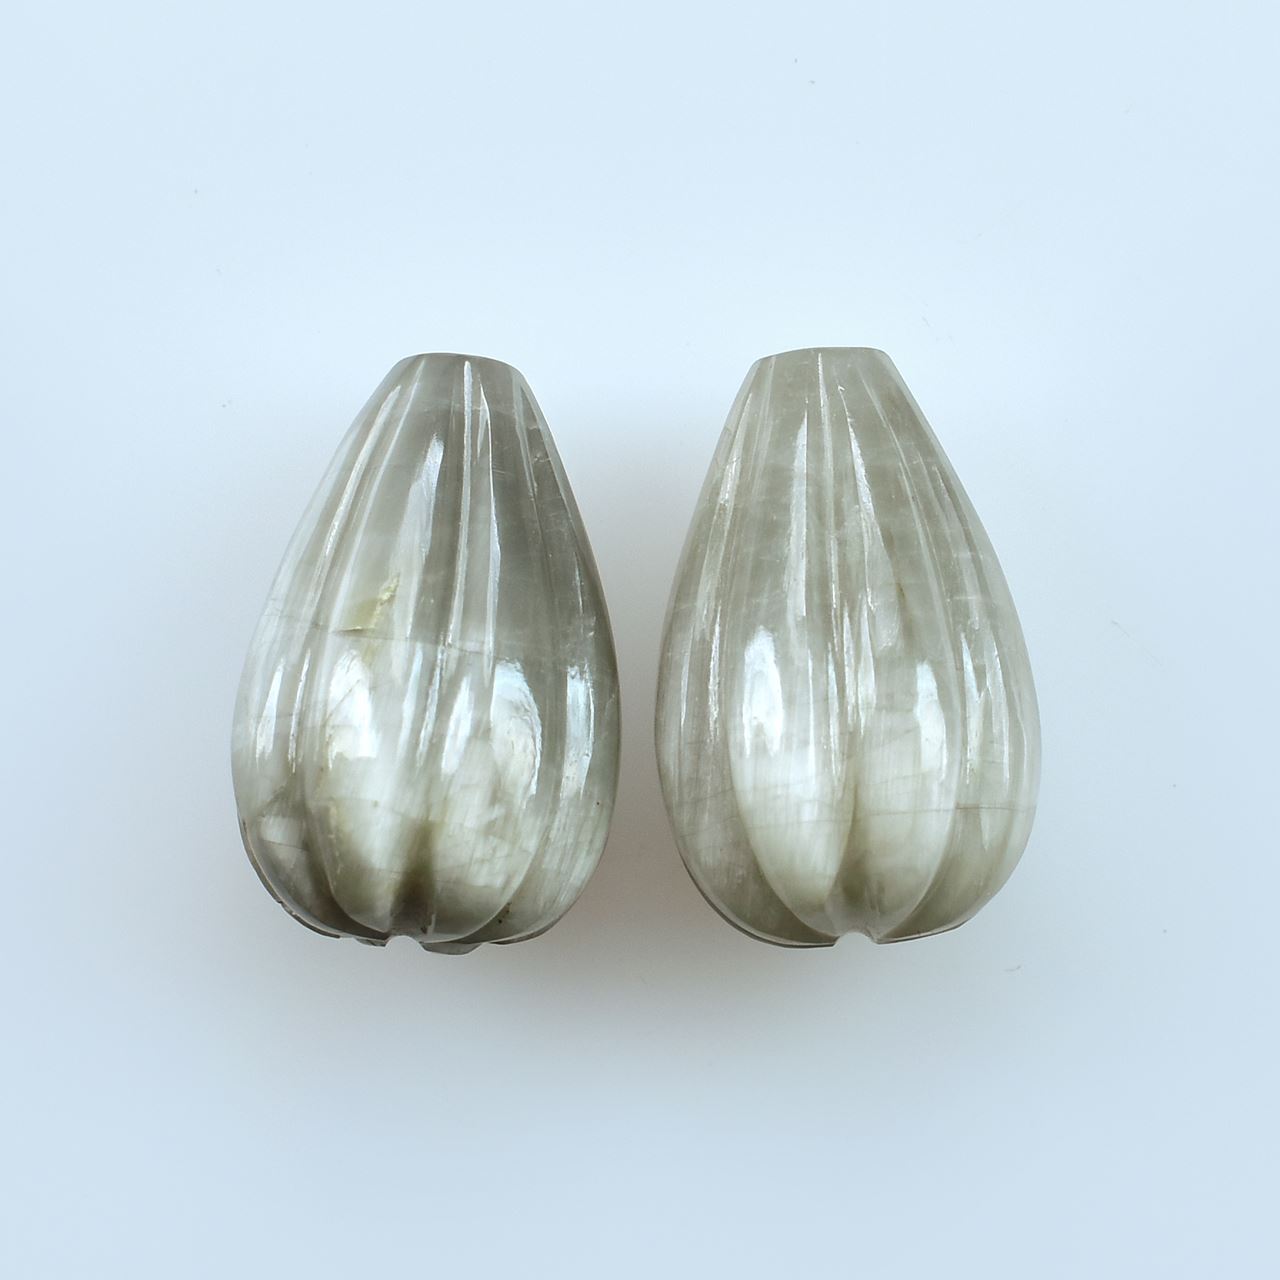 CAT'S EYE GREY MELON CARVED DROPS 12.00X8.00 MM 4.98 Cts.